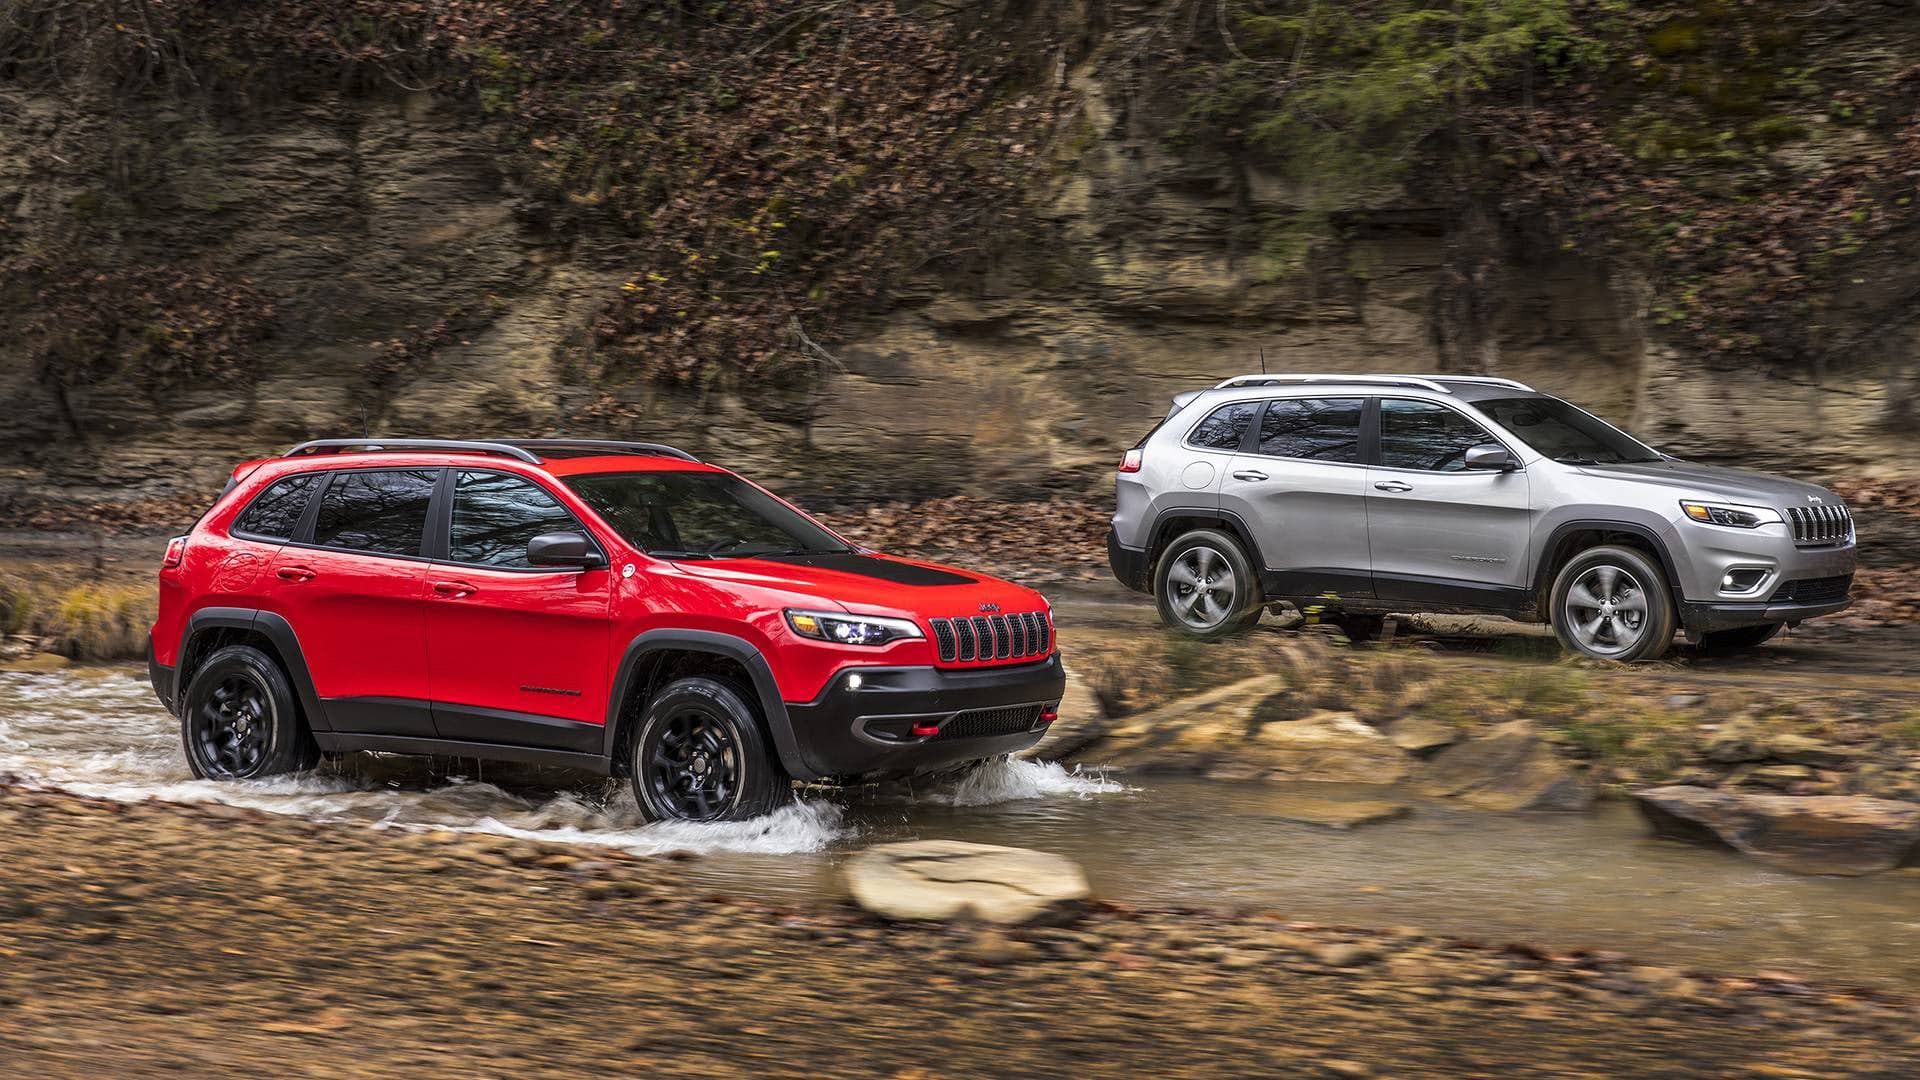 The 2019 Jeep Cherokee Gets a Better Face and a Turbo Engine